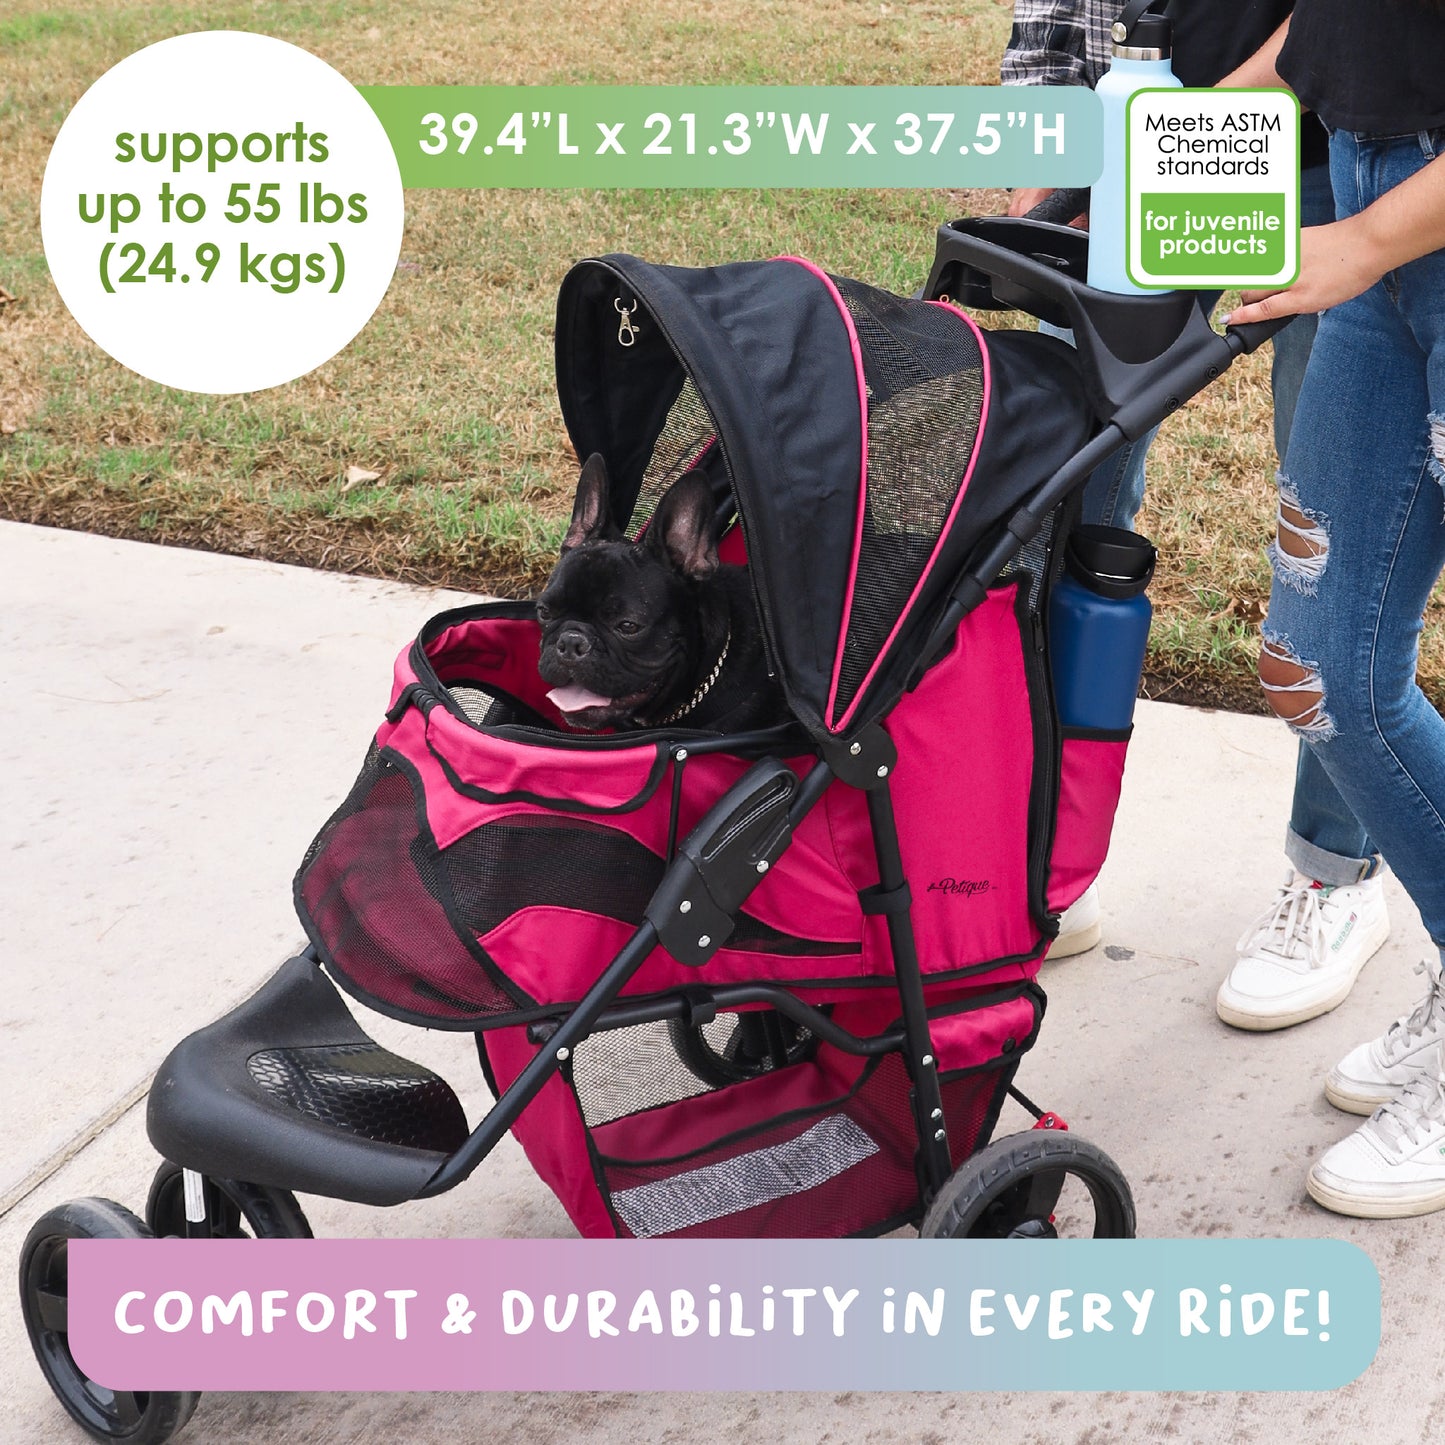 durable pet stroller supports pets up to 55 LBS